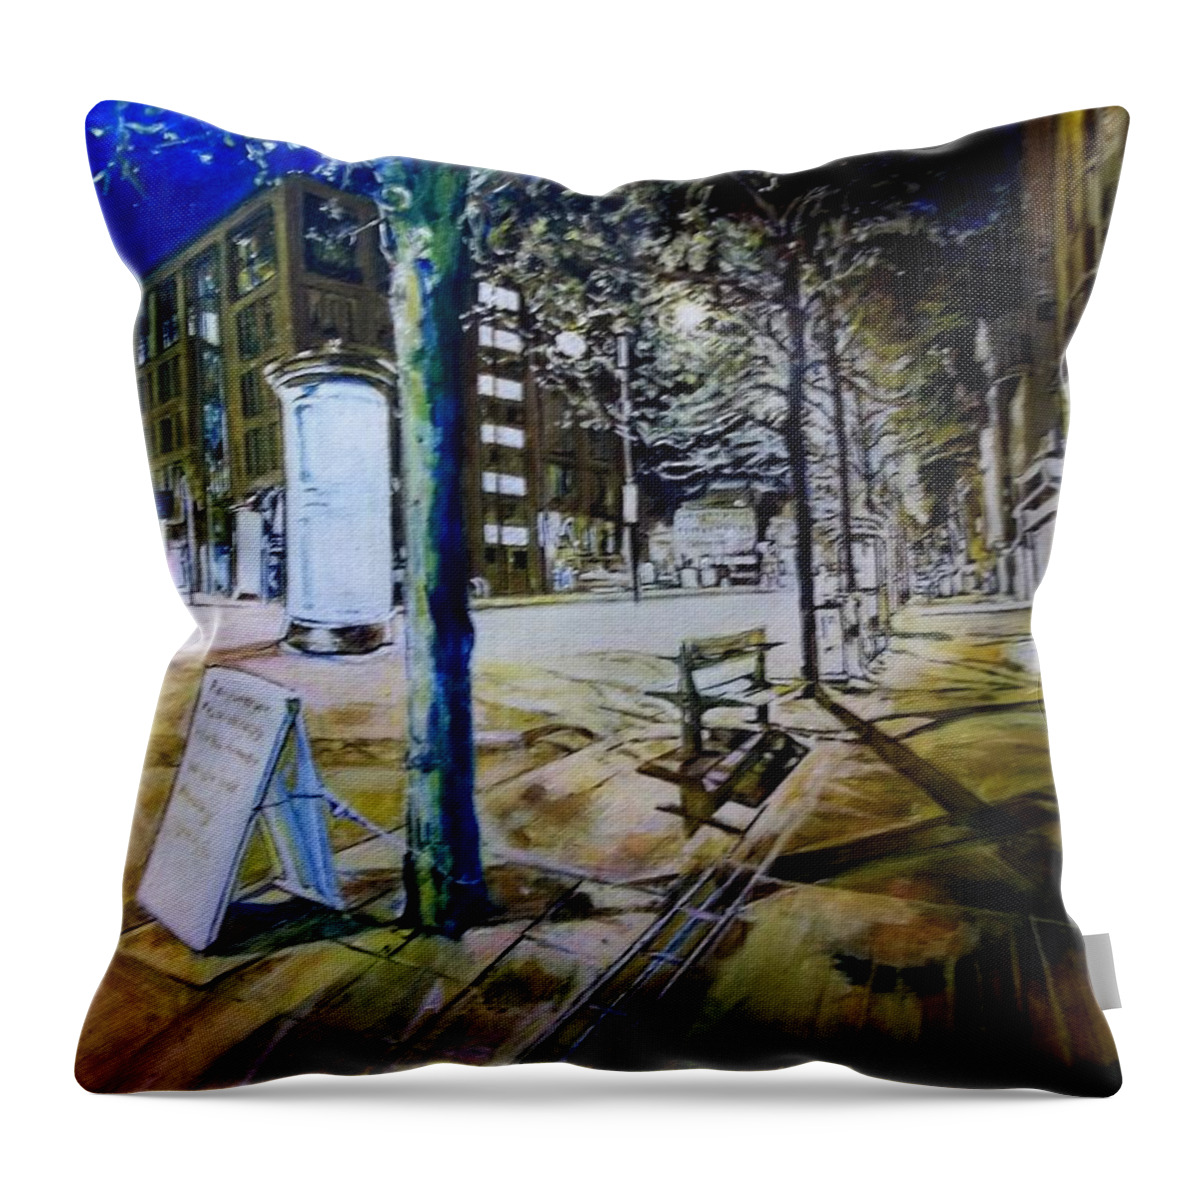 Shop Fronts Throw Pillow featuring the painting Piccadilly Gardens, Manchester by Rosanne Gartner